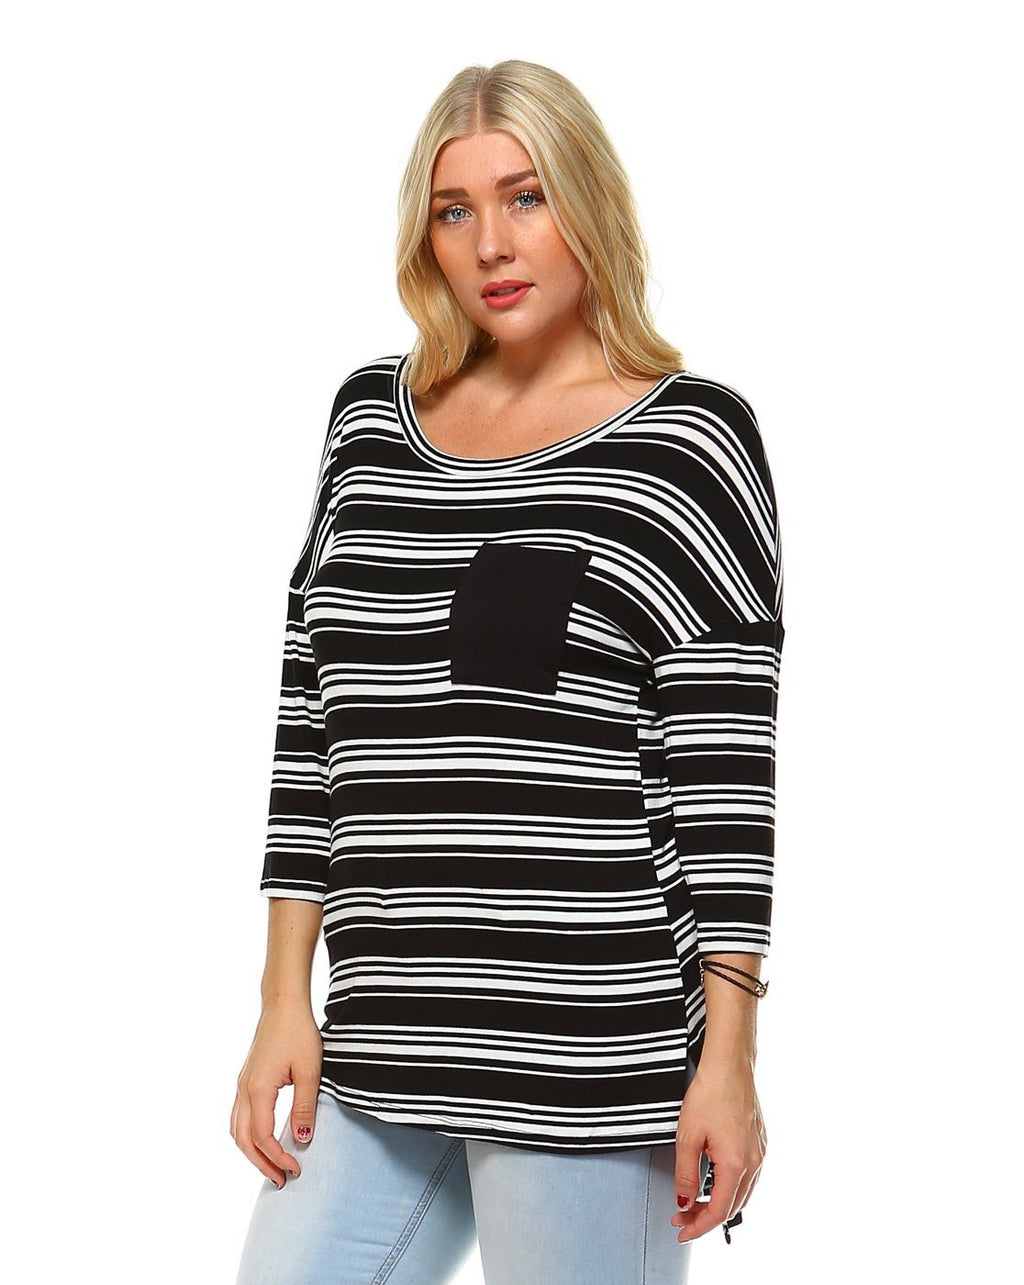 Striped round neck 3/4 sleeve  hi-low tunic with single front chest pocket Perfect for Everyday Comfort, Concerts, Festivals, Date Night, Brunch, Shopping, lightweight fabric for any season